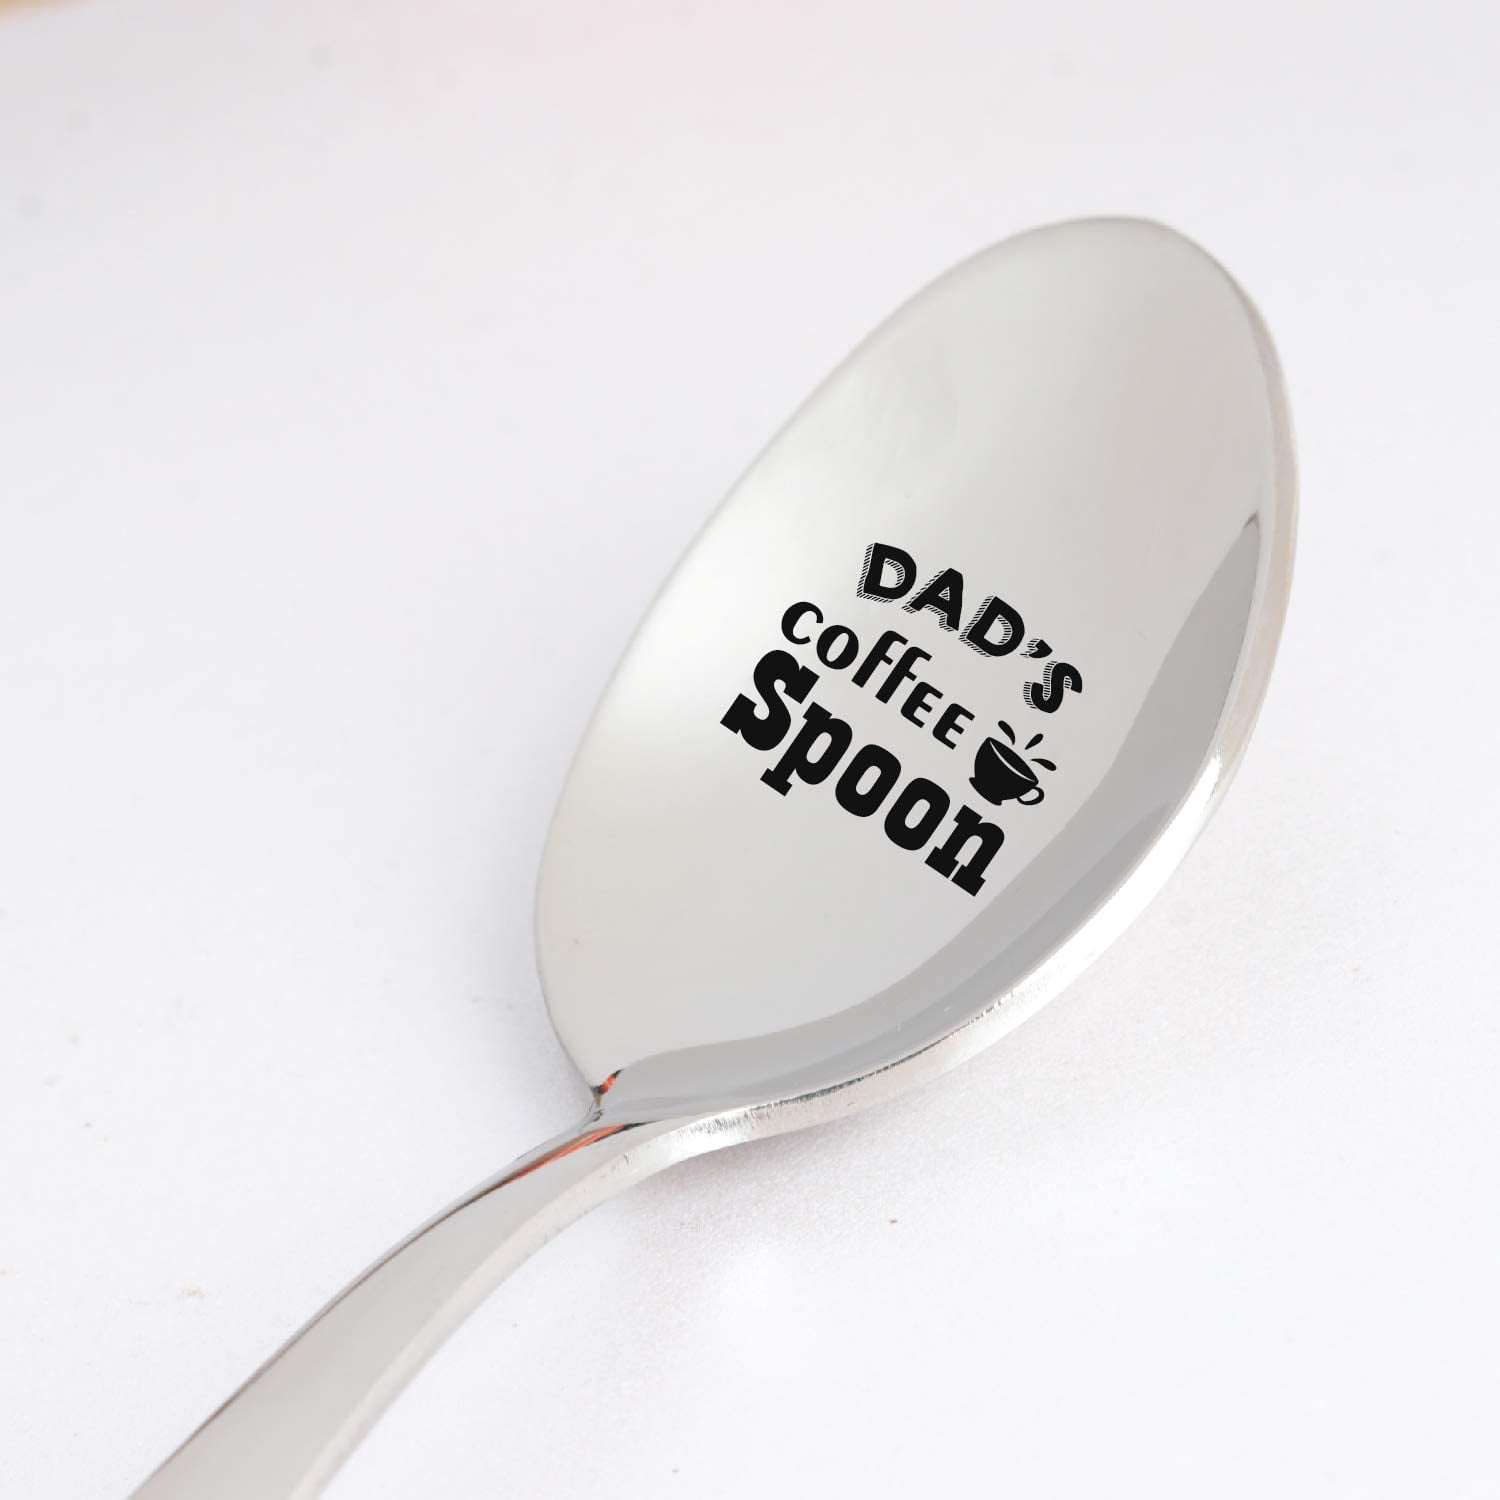 Dad Gift from Daughter Son Wife Funny Coffee Spoon Engraved Stainless Steel for Dad Coffee Lover Daddys Coffee Spoon Engraved Best Daddy Gifts Dad Fathers Day/Birthday/Christmas Gifts